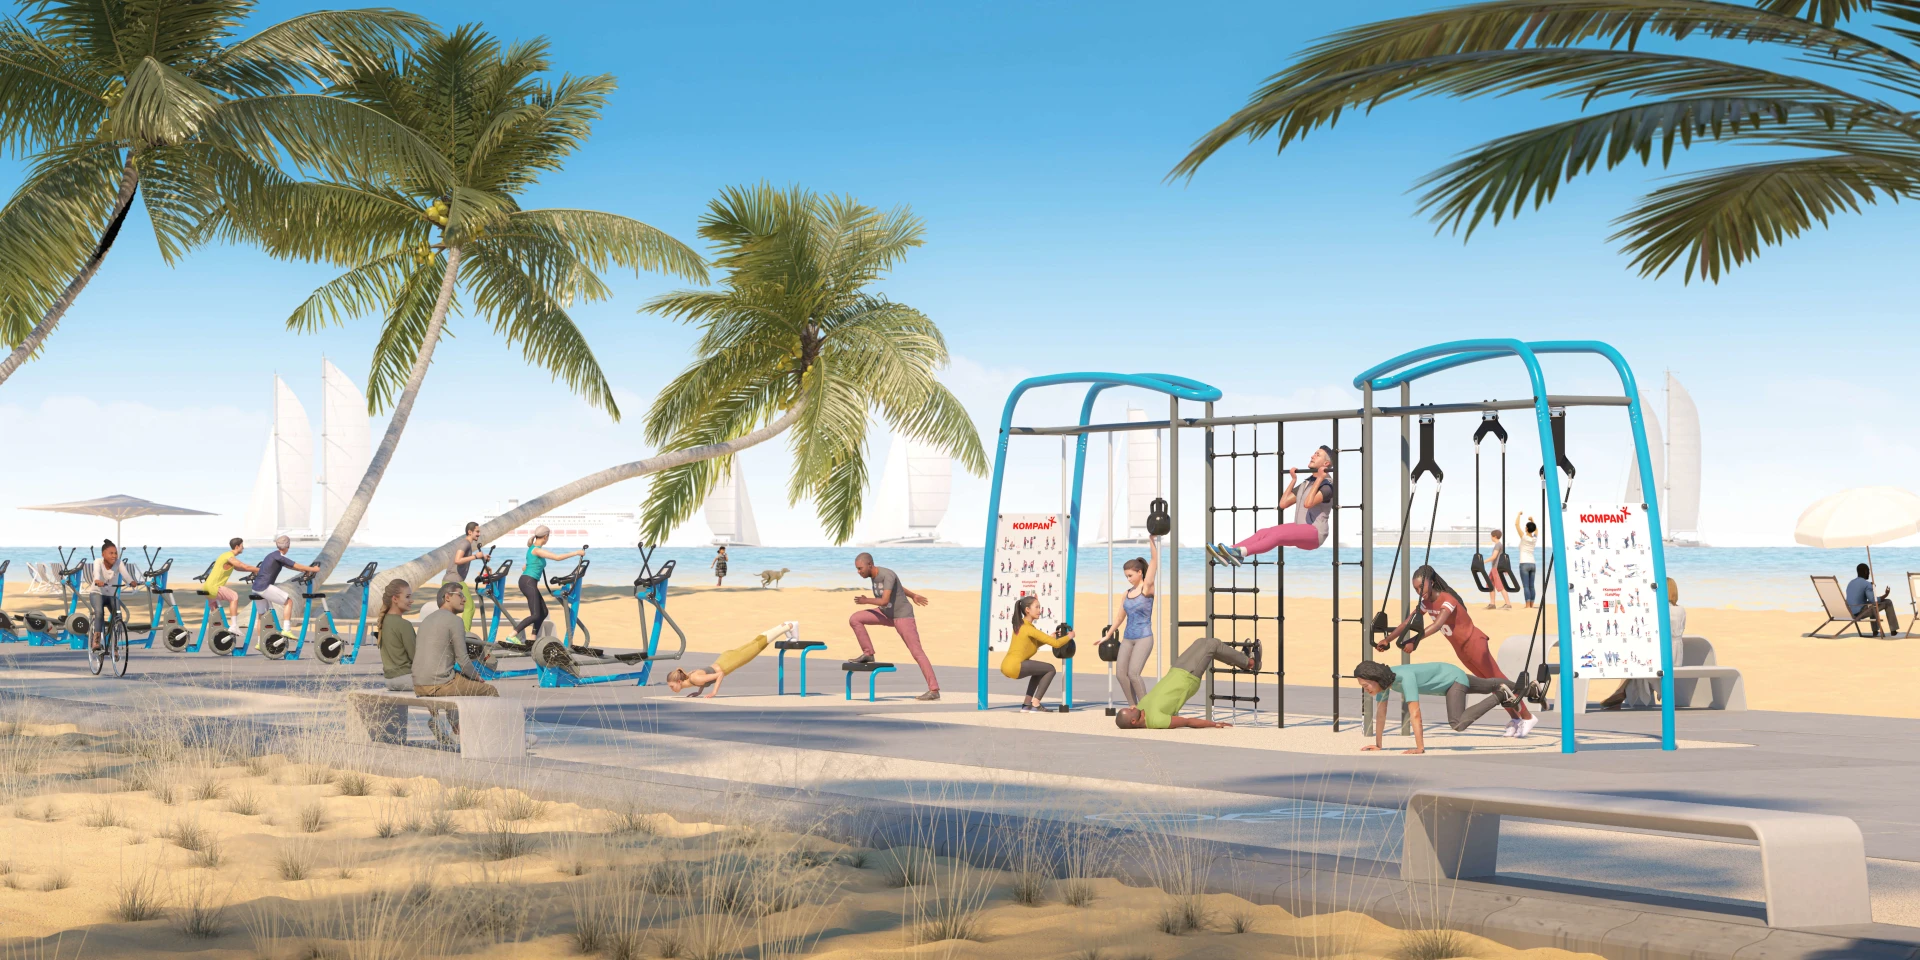 design concept of outdoor cardio machines and cross training by a boardwalk